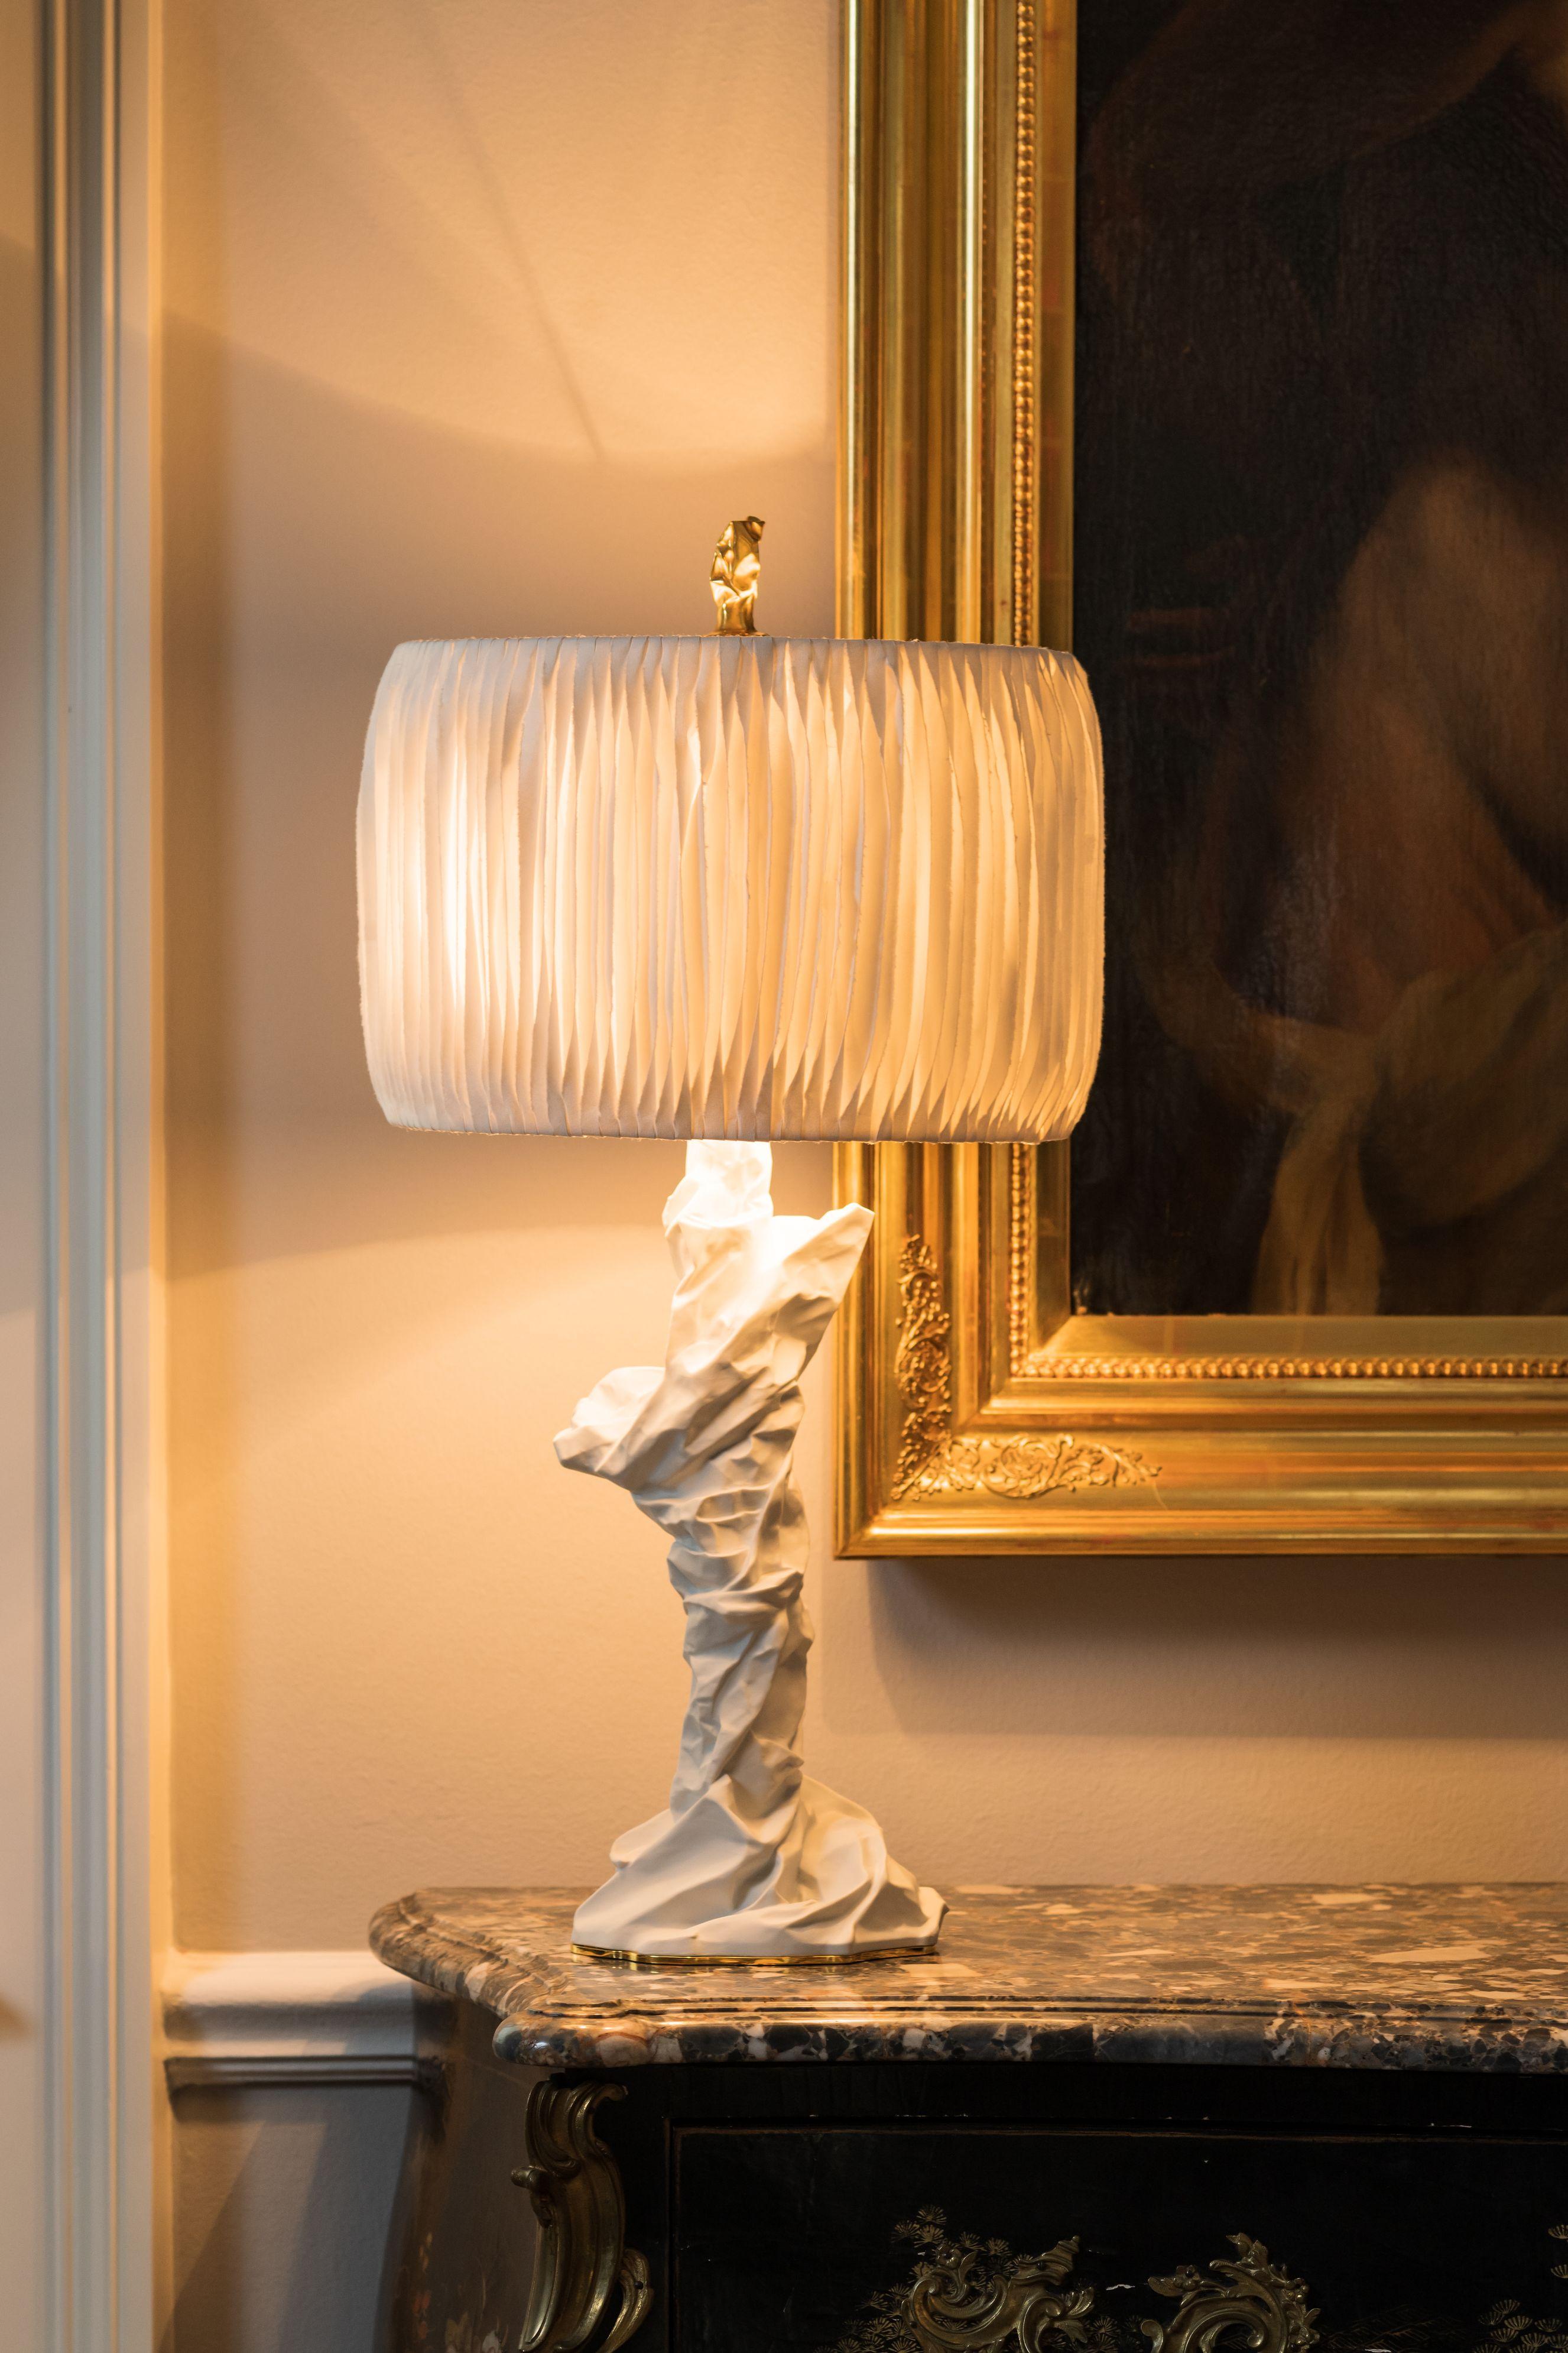 Charta Alba II table lamp by Studio Palatin.
Dimensions: H 75 x D 35 cm
Materials: biscuit porcelain, 24K gilded brass, Japanese hosho paper.

The artist’s inspiration for the Charta Alba Collection came from a series of sculptures formed from